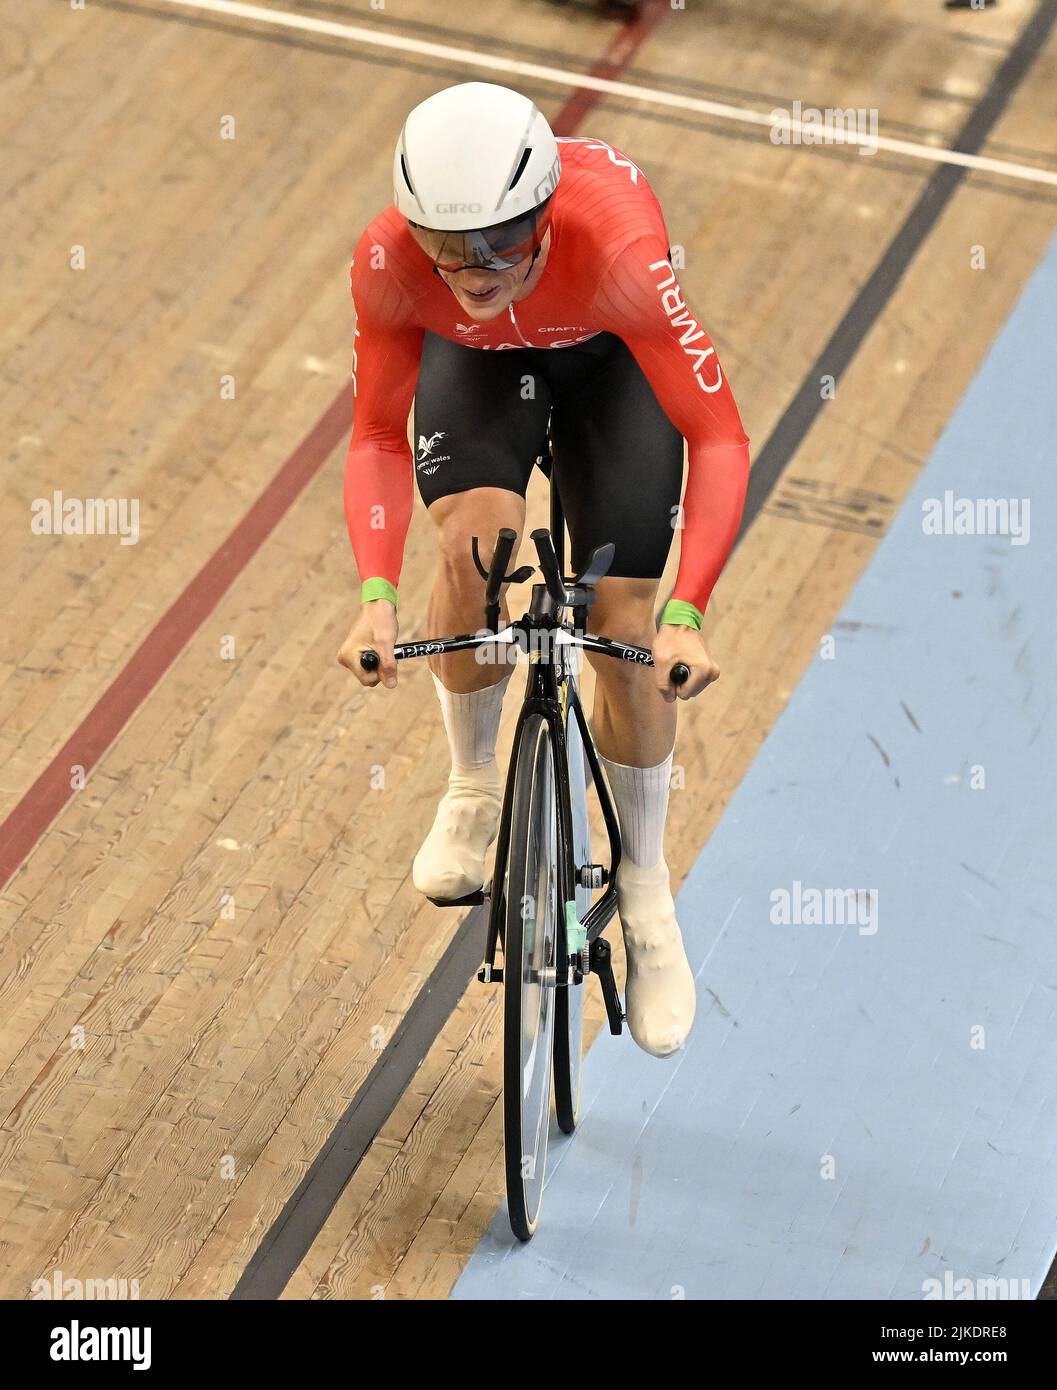 Stratford, United Kingdom. 01st Aug, 2022. Commonwealth Games Track Cycling. Olympic Velodrome. Stratford. Joe Holt (WAL) during the Mens 1000m Time Trial. Credit: Sport In Pictures/Alamy Live News Stock Photo